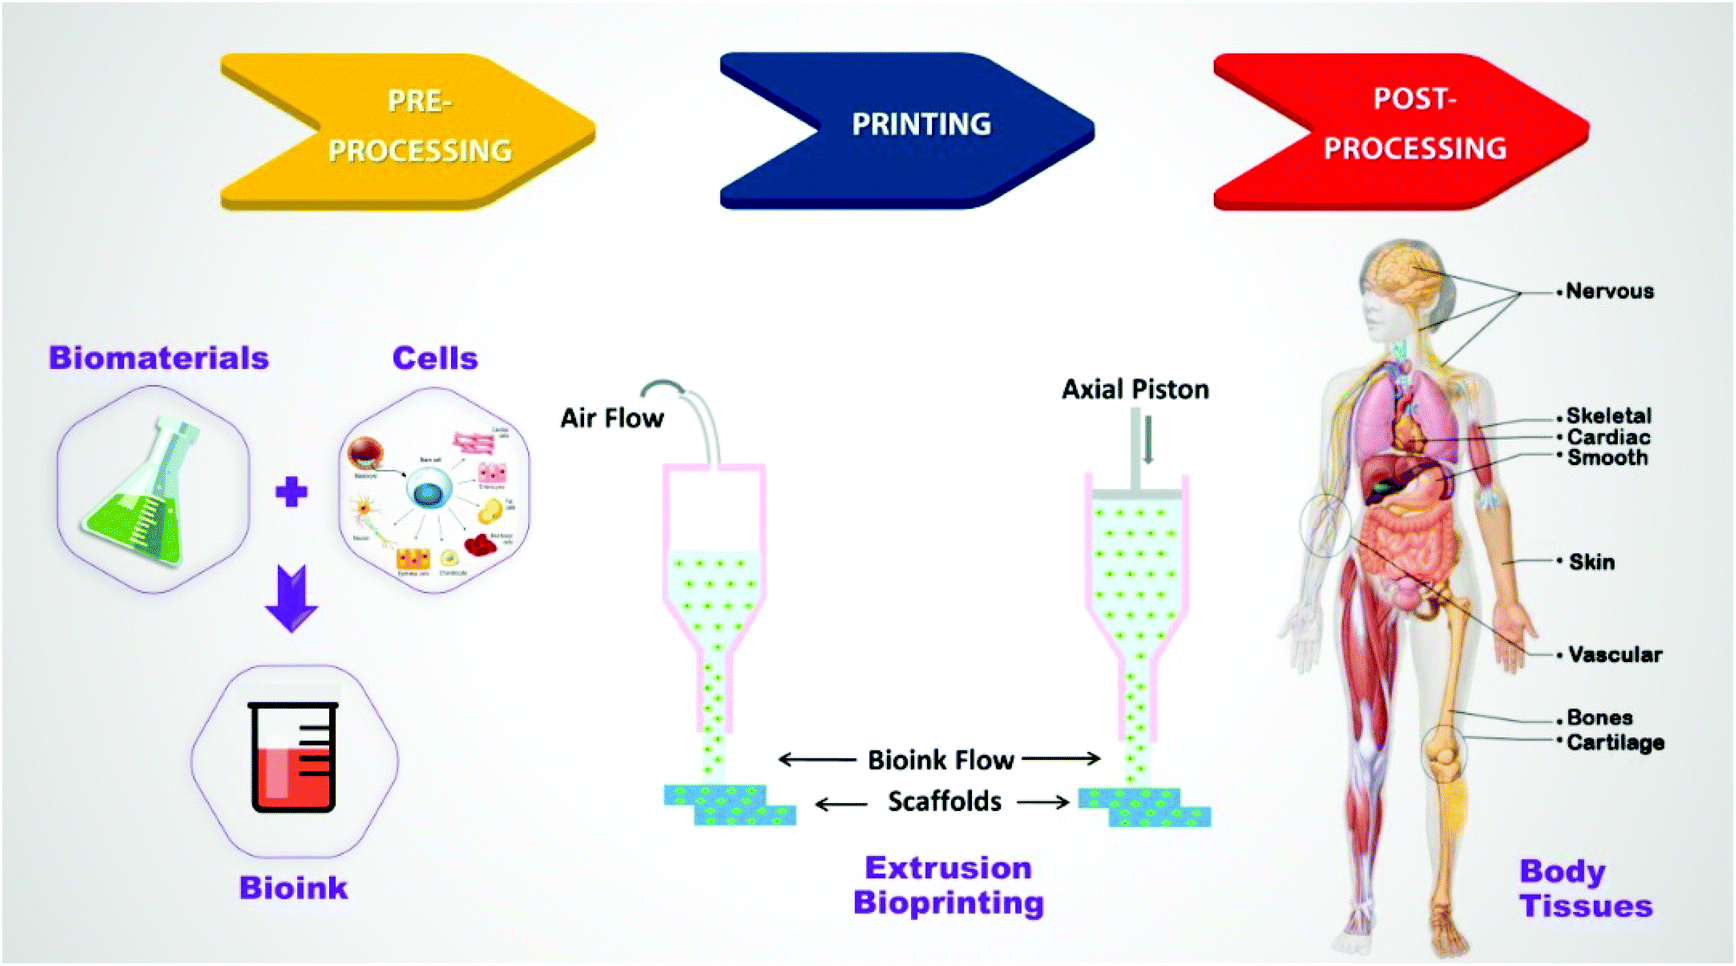 Recent Progress In Extrusion 3d Bioprinting Of Hydrogel Biomaterials For Tissue Regeneration A Comprehensive Review With Focus On Advanced Fabrication Techniques Biomaterials Science Rsc Publishing